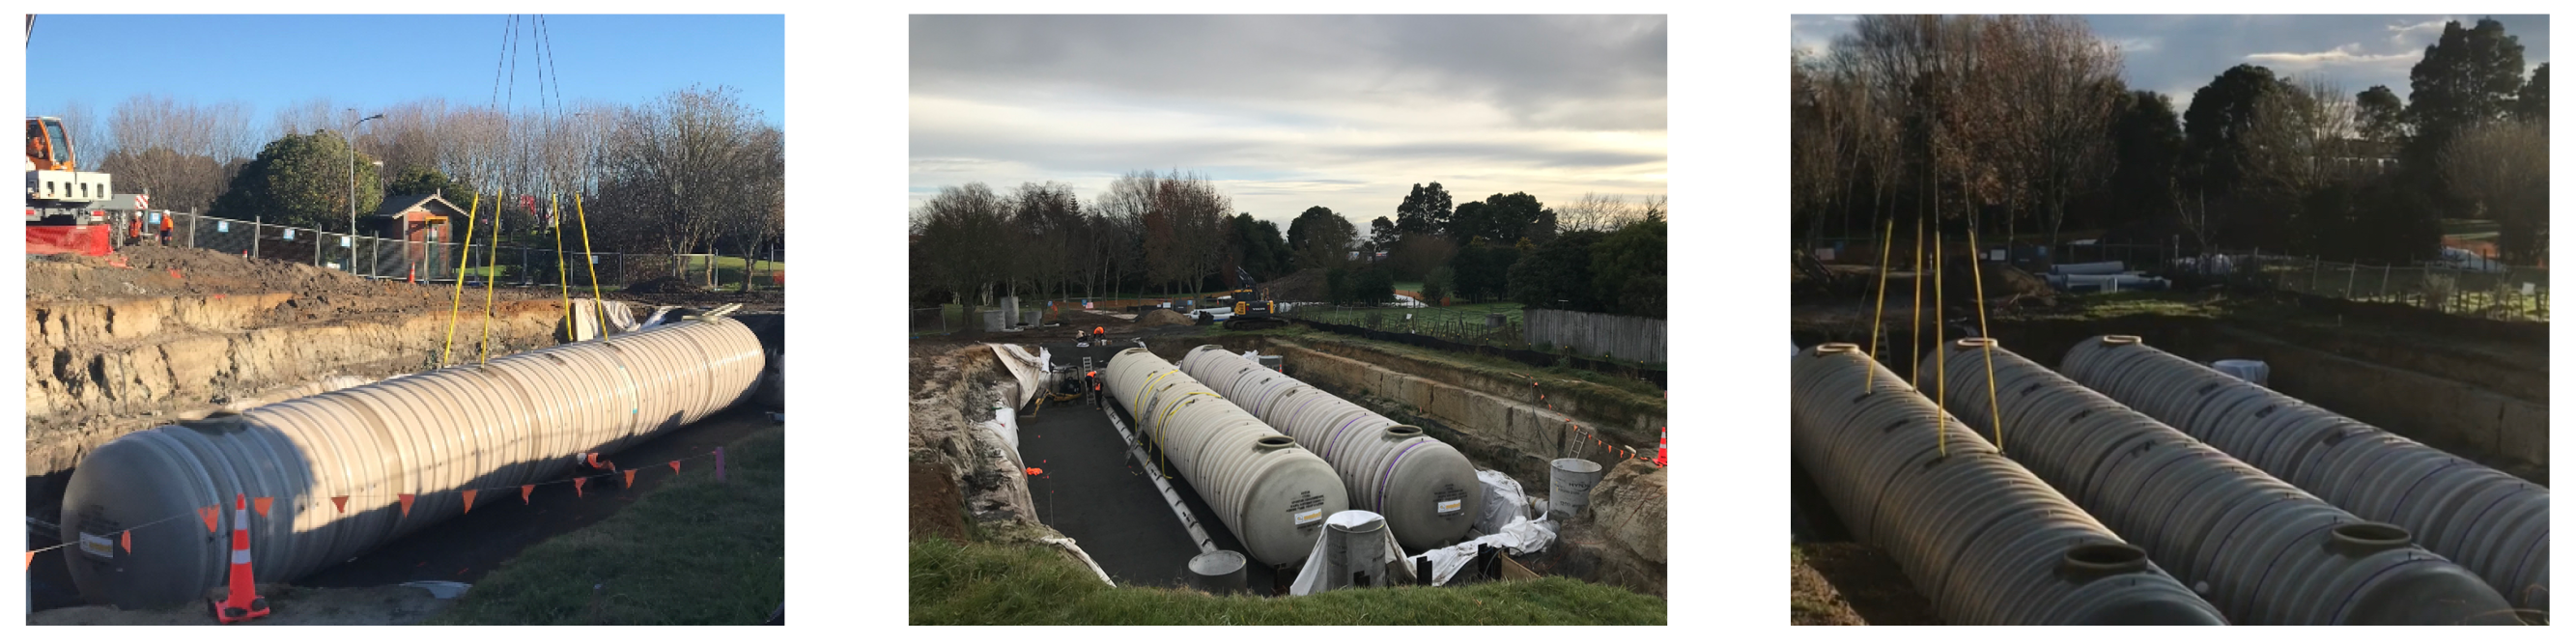 Underground storage tank installation at Albert Park Pump Station, Te Awamutu for the Waikeria pipeline infrastructure project